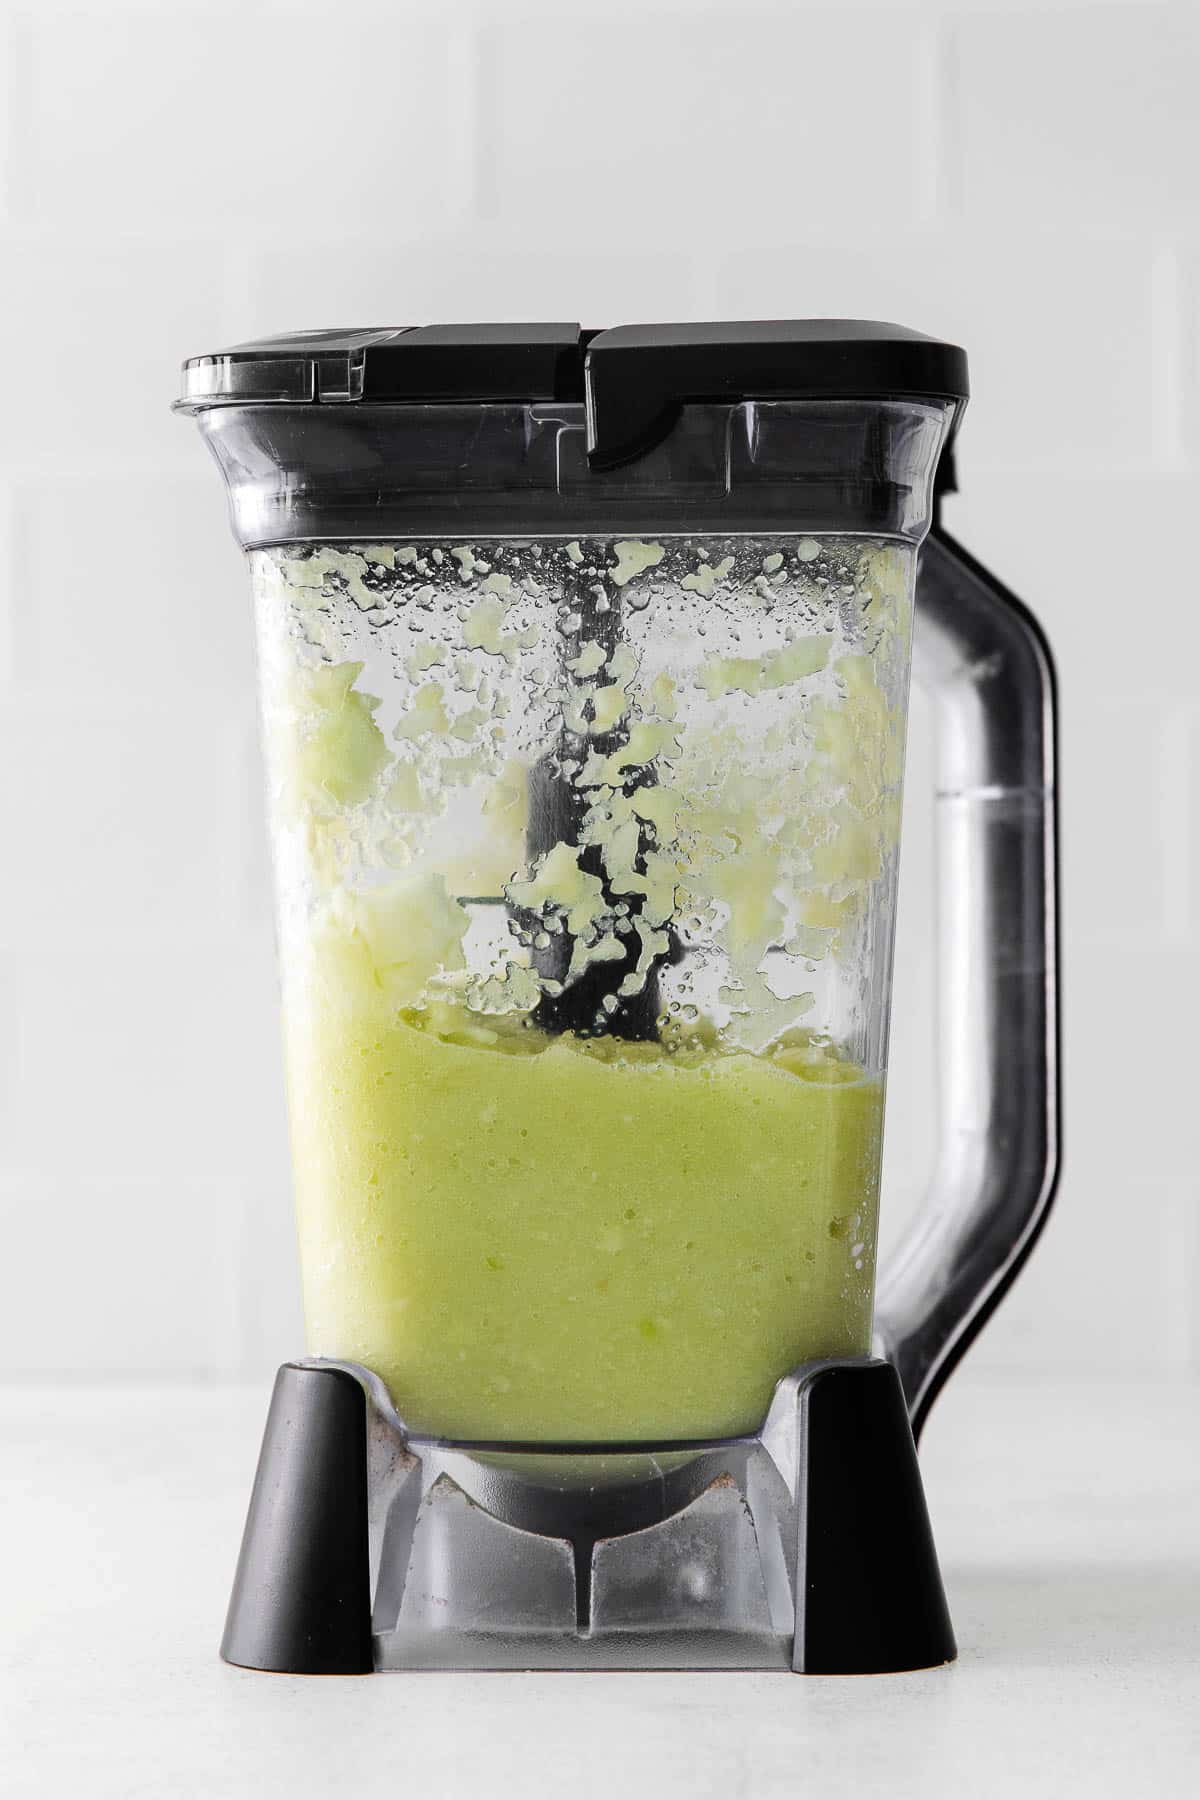 blender with pureed green apples.